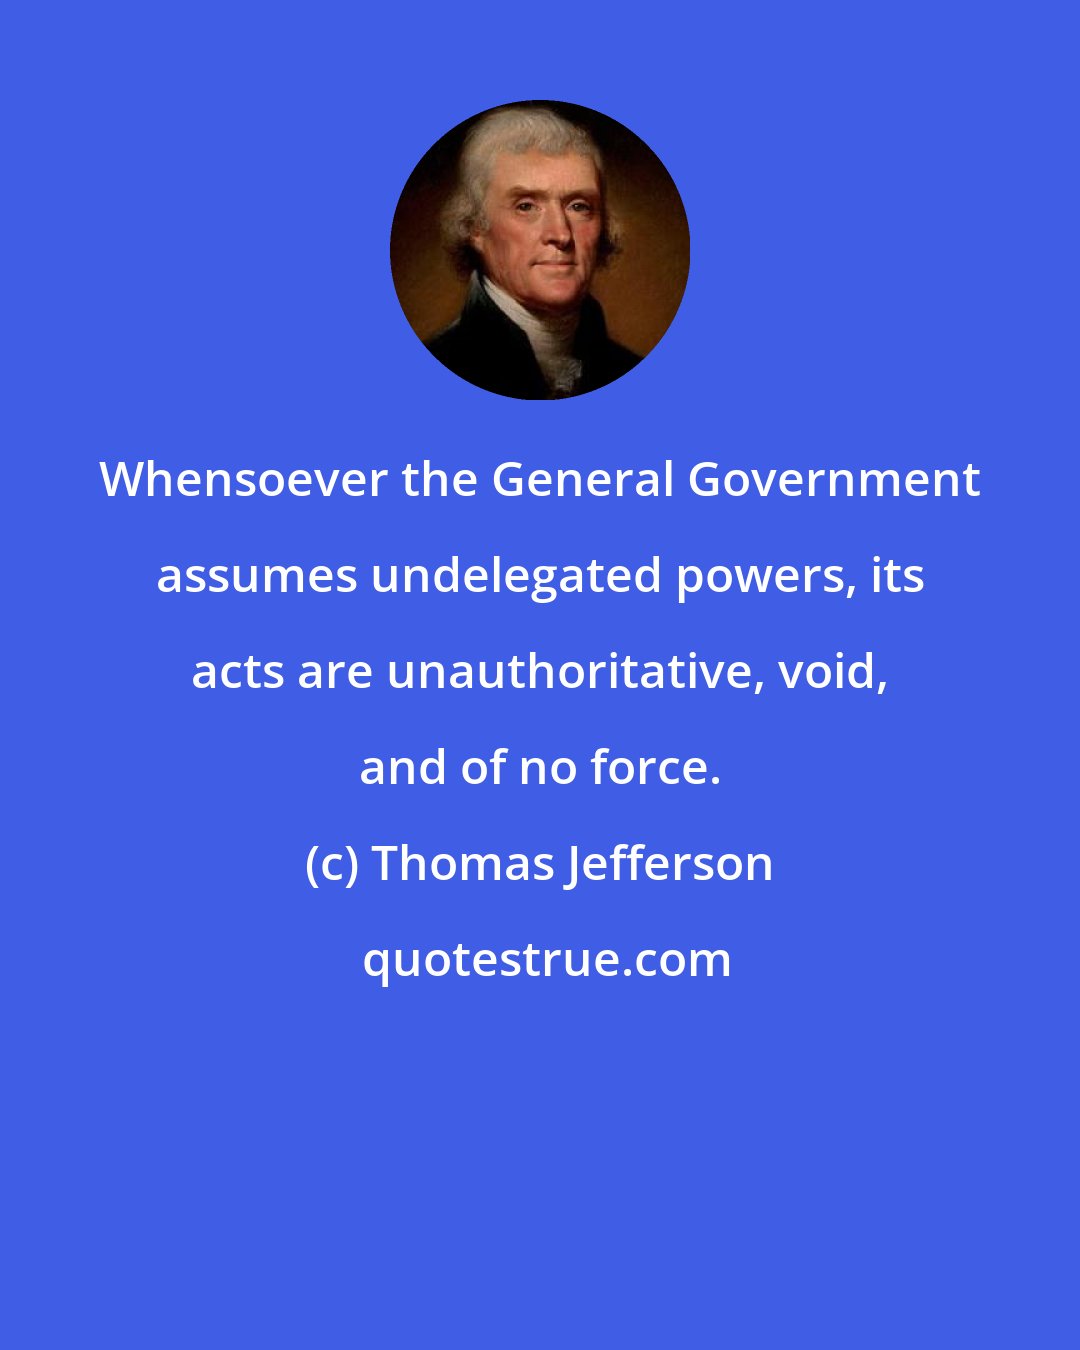 Thomas Jefferson: Whensoever the General Government assumes undelegated powers, its acts are unauthoritative, void, and of no force.